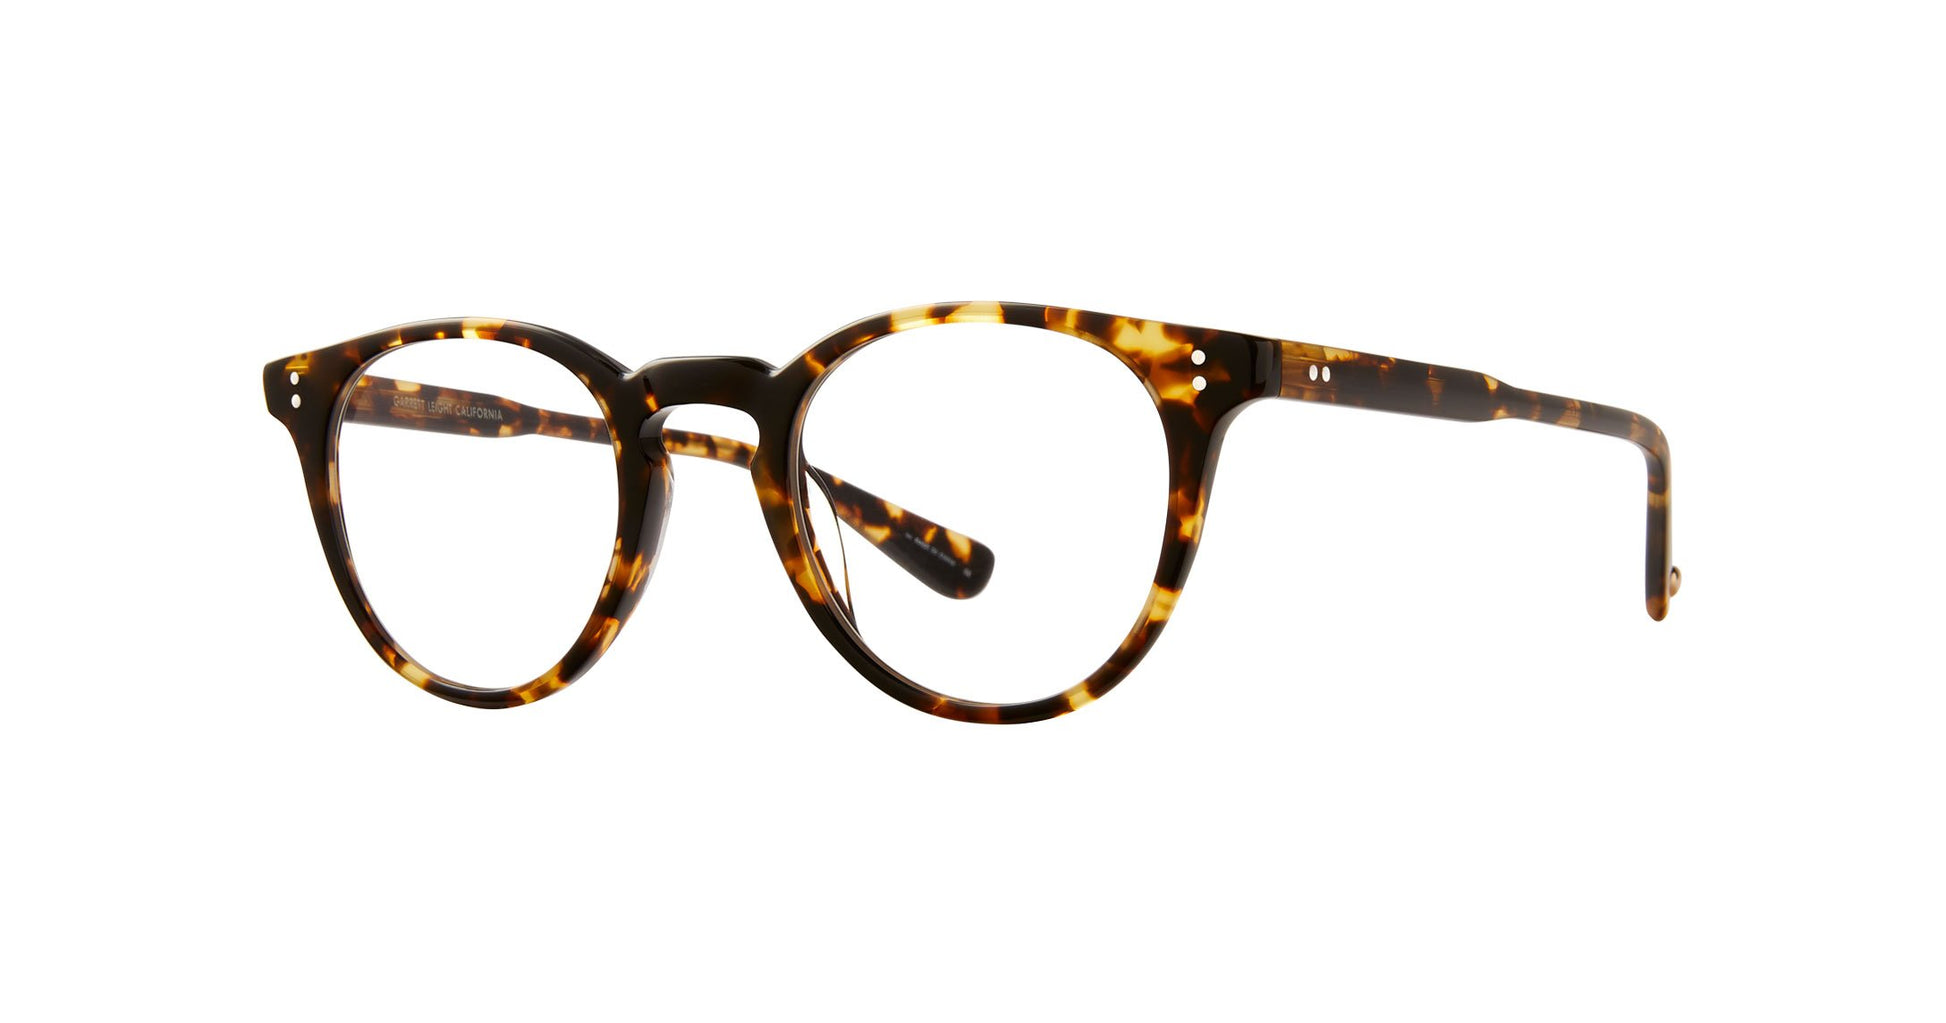 A bold silhouette and minimal hardware make the Clement Tuscan Tortoise striking in its simplicity. Thoughtfully pared back with a new temple design, these eyeglasses evoke the spirit of Andy Warhol. Handcrafted in California. Now Available in Toronto, Canada.